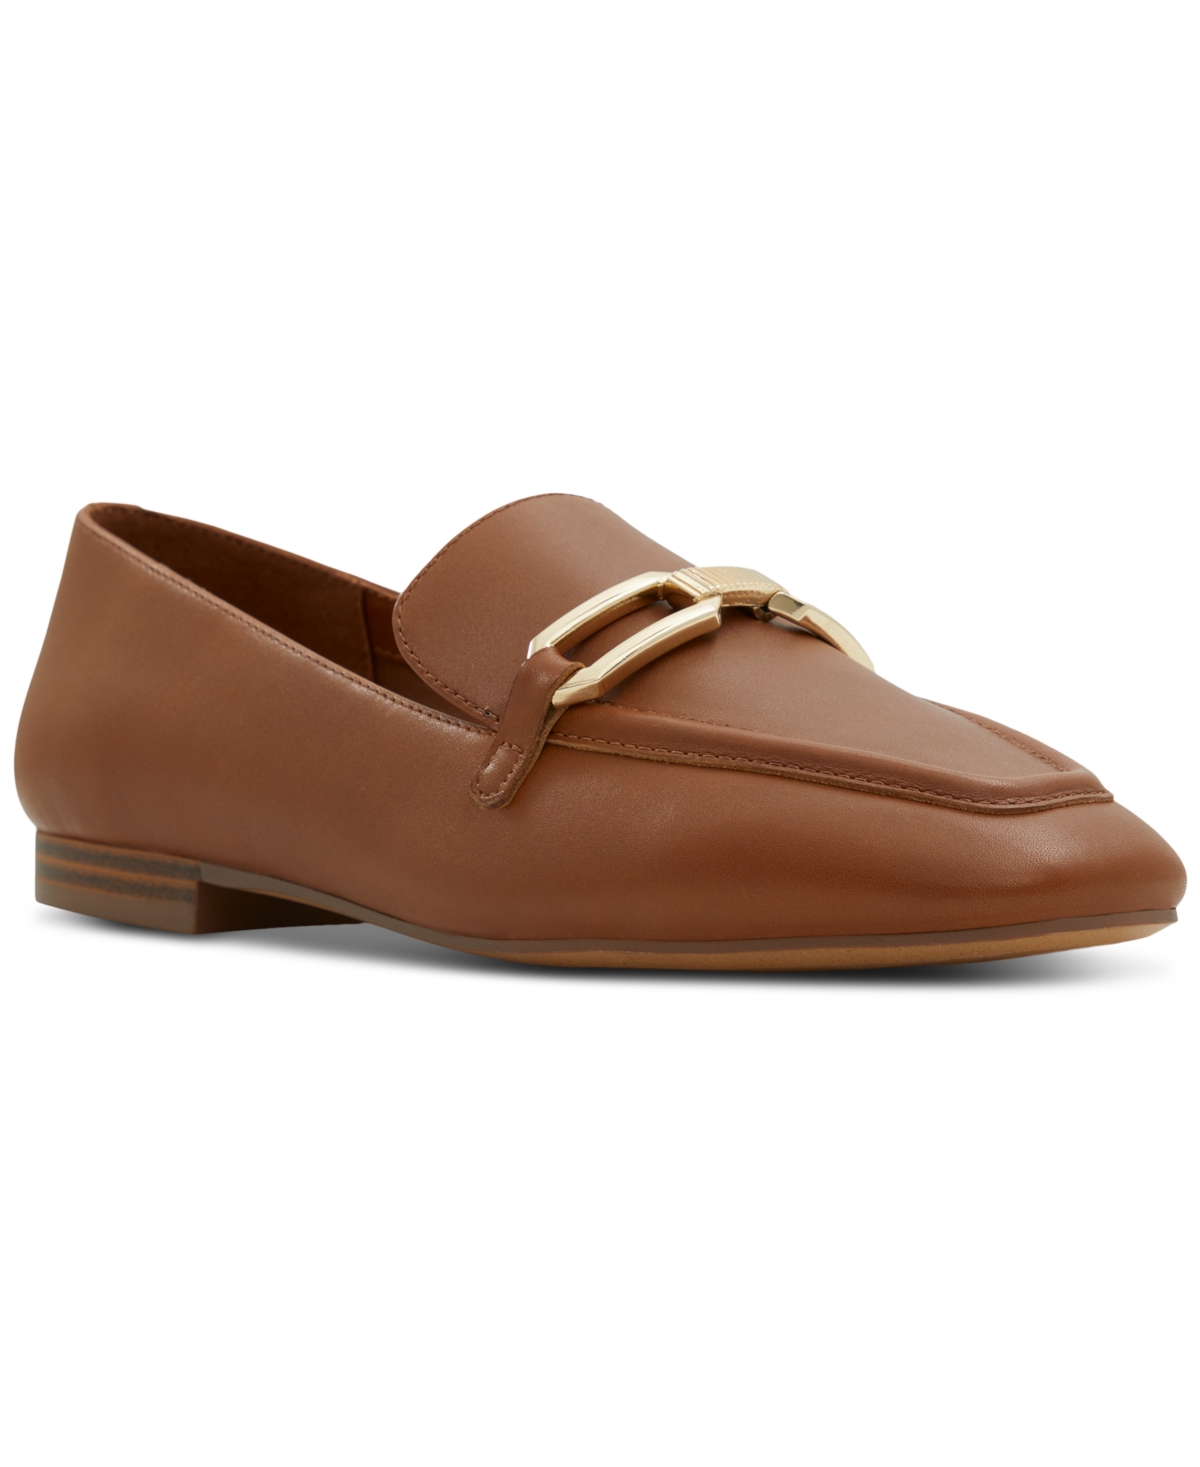 Aldo Women's Lindsie Slip-on Tailored Hardware Loafers In Cognac Leather